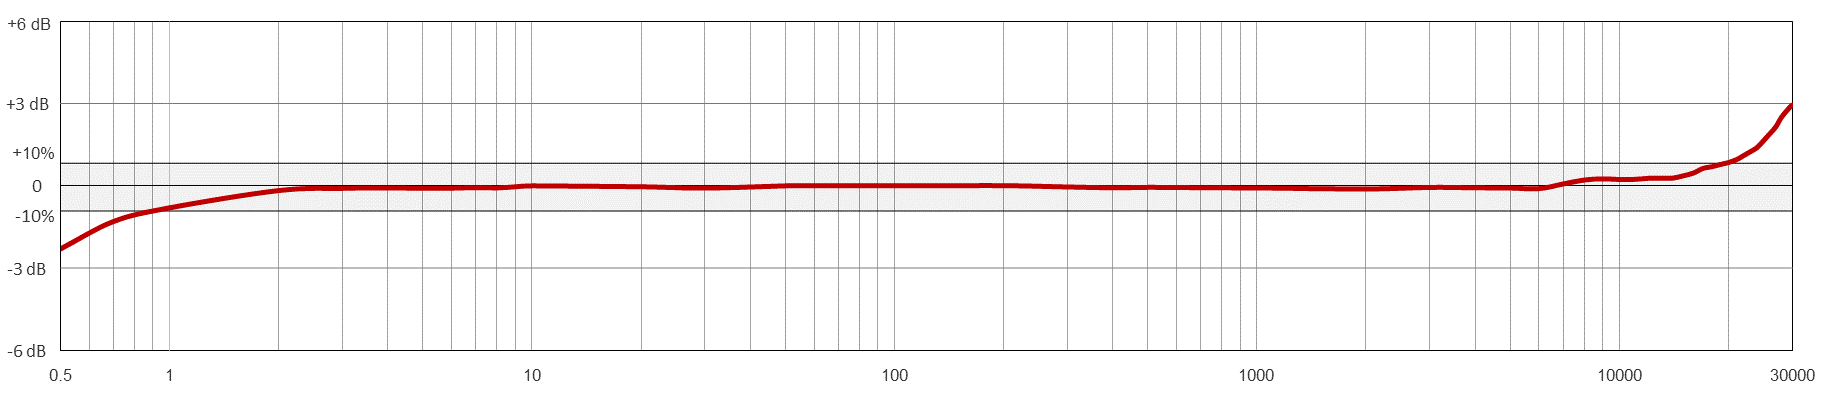 MCB211 TYPICAL FREQUENCY RESPONSE